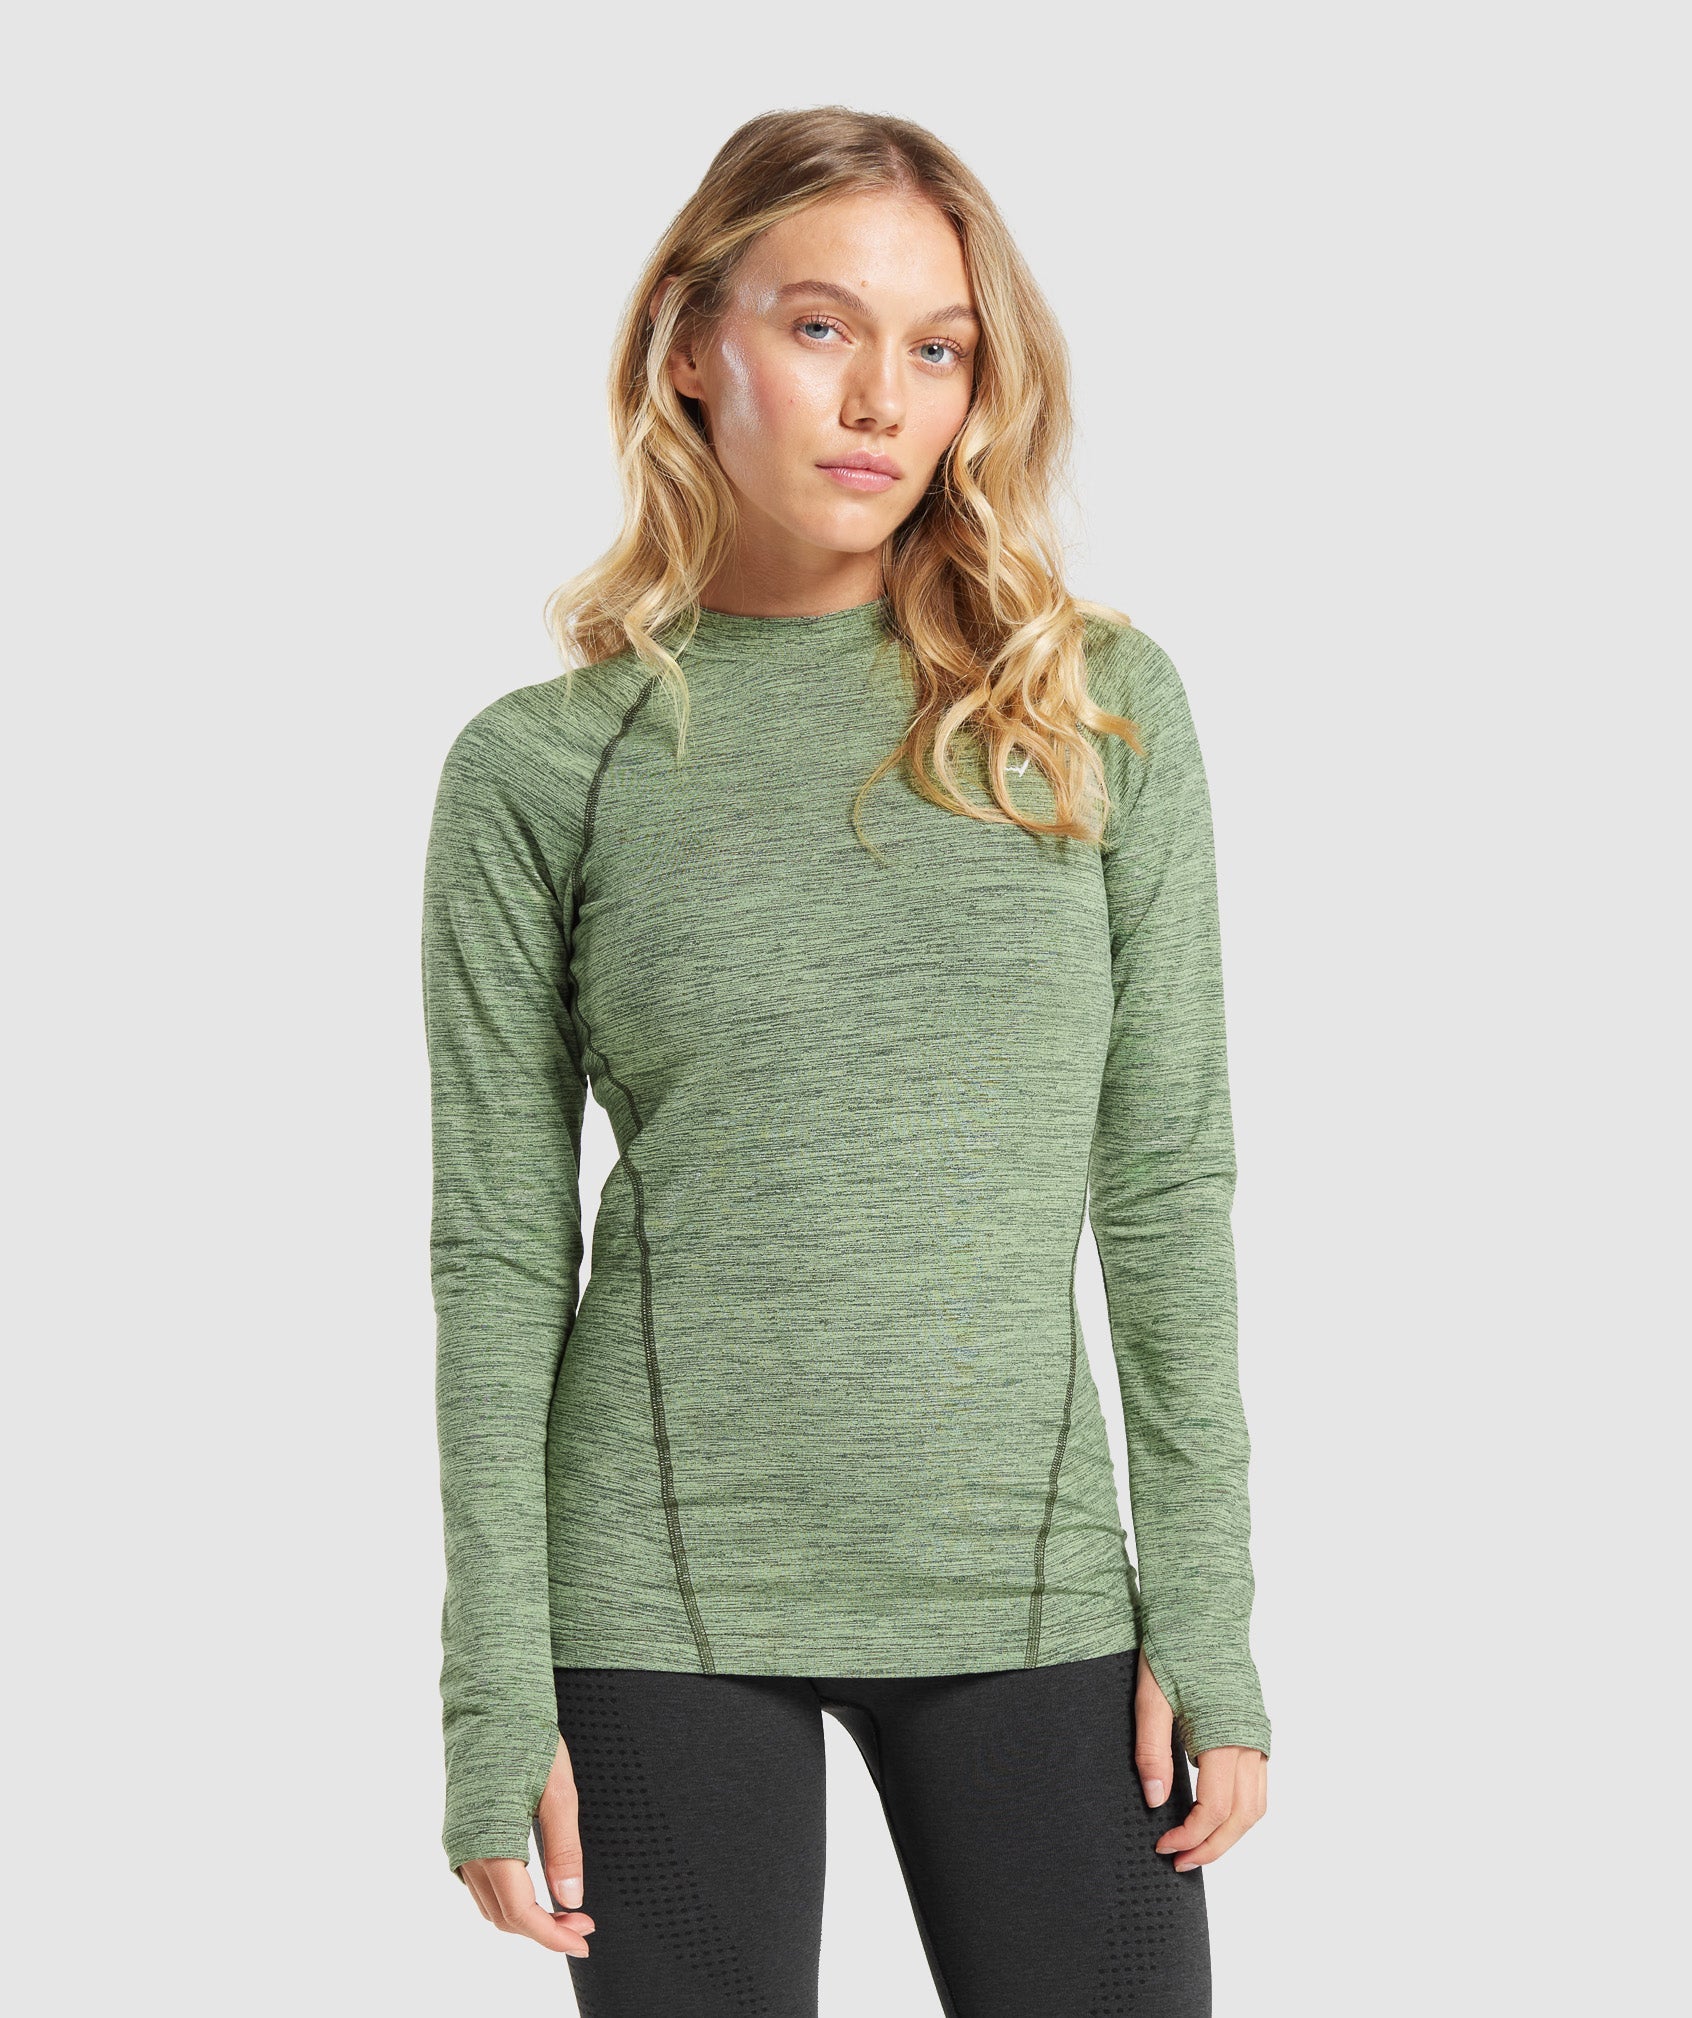 Fleece Lined Long Sleeve Top in Winter Olive/Light Sage Green - view 1